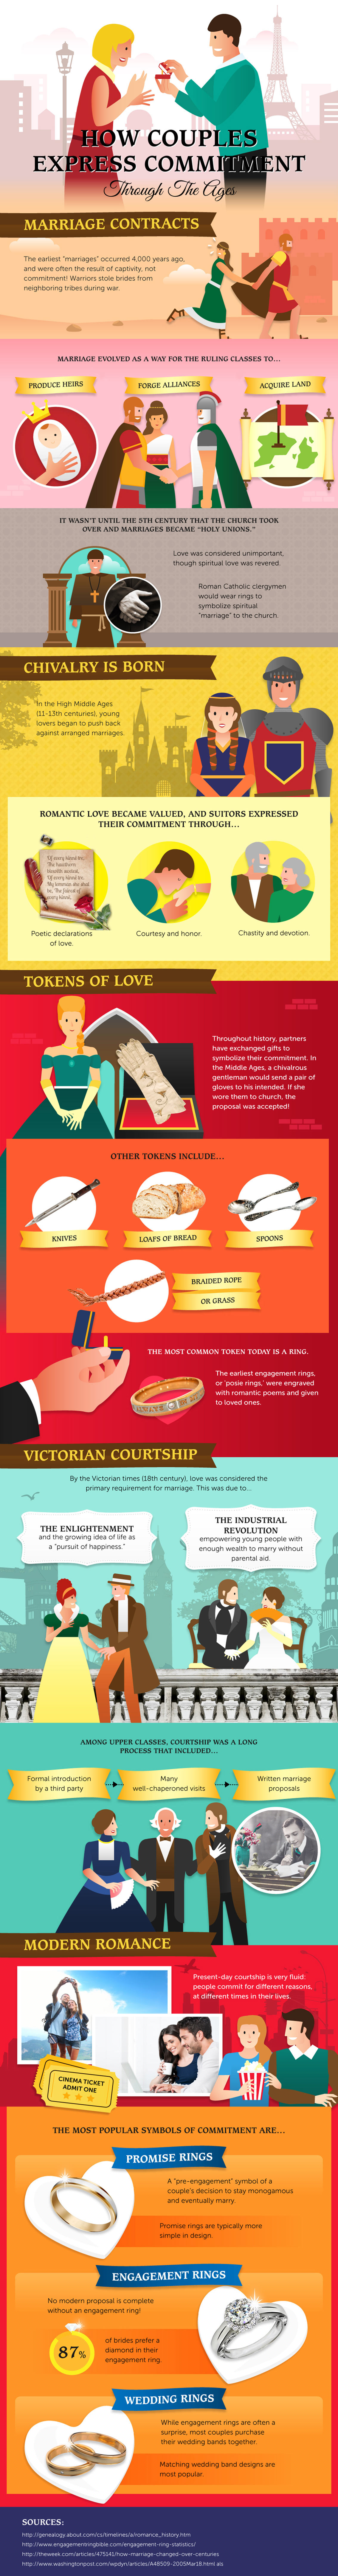 Courtship and Marriage Through the Ages Infographic